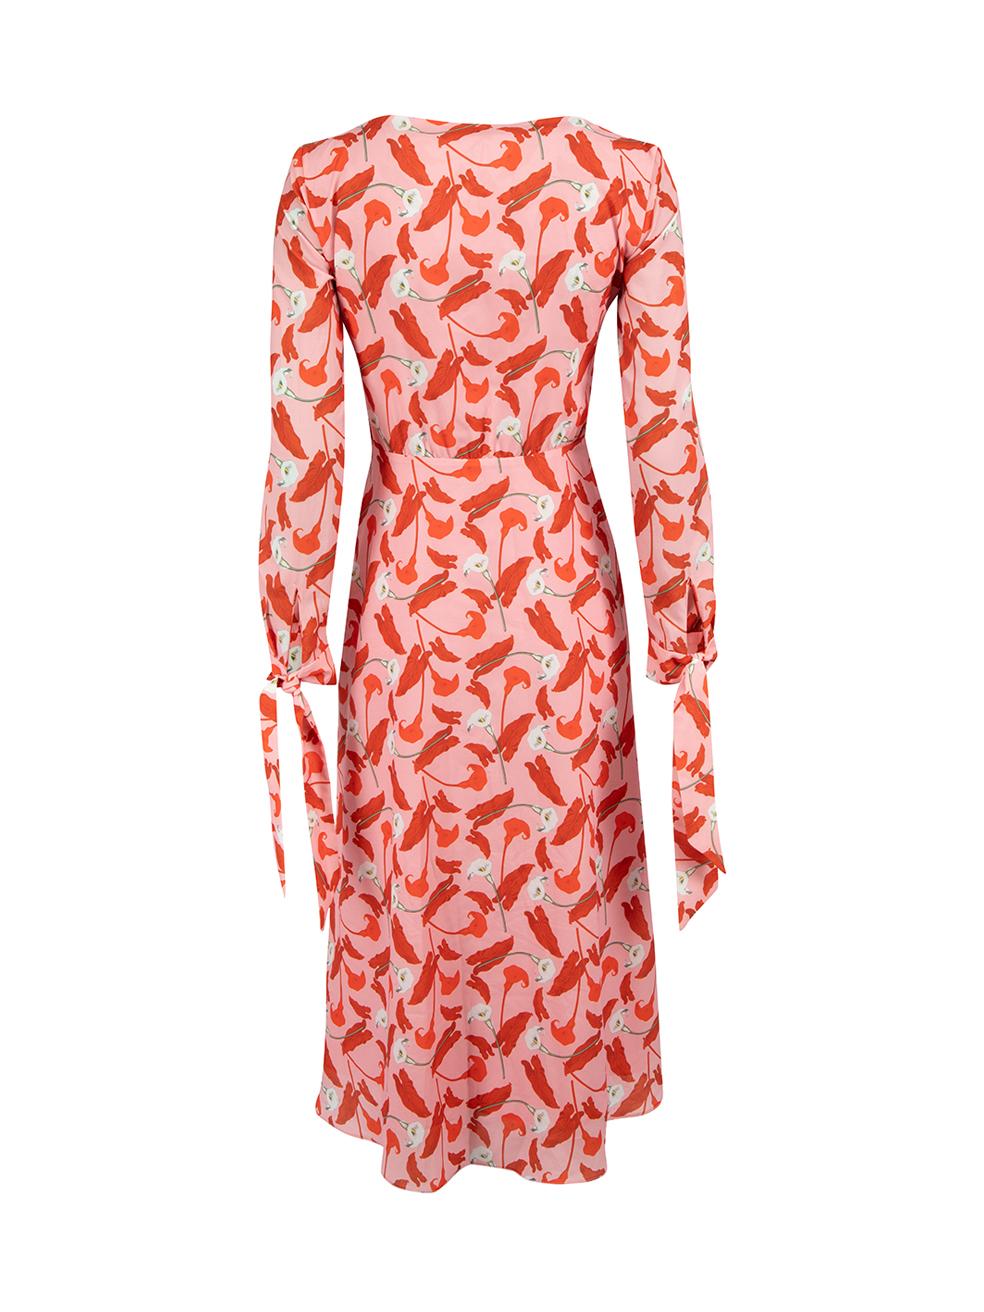 Borgo De Nor Pink Floral Print Tie Front Dress Size M In Excellent Condition For Sale In London, GB